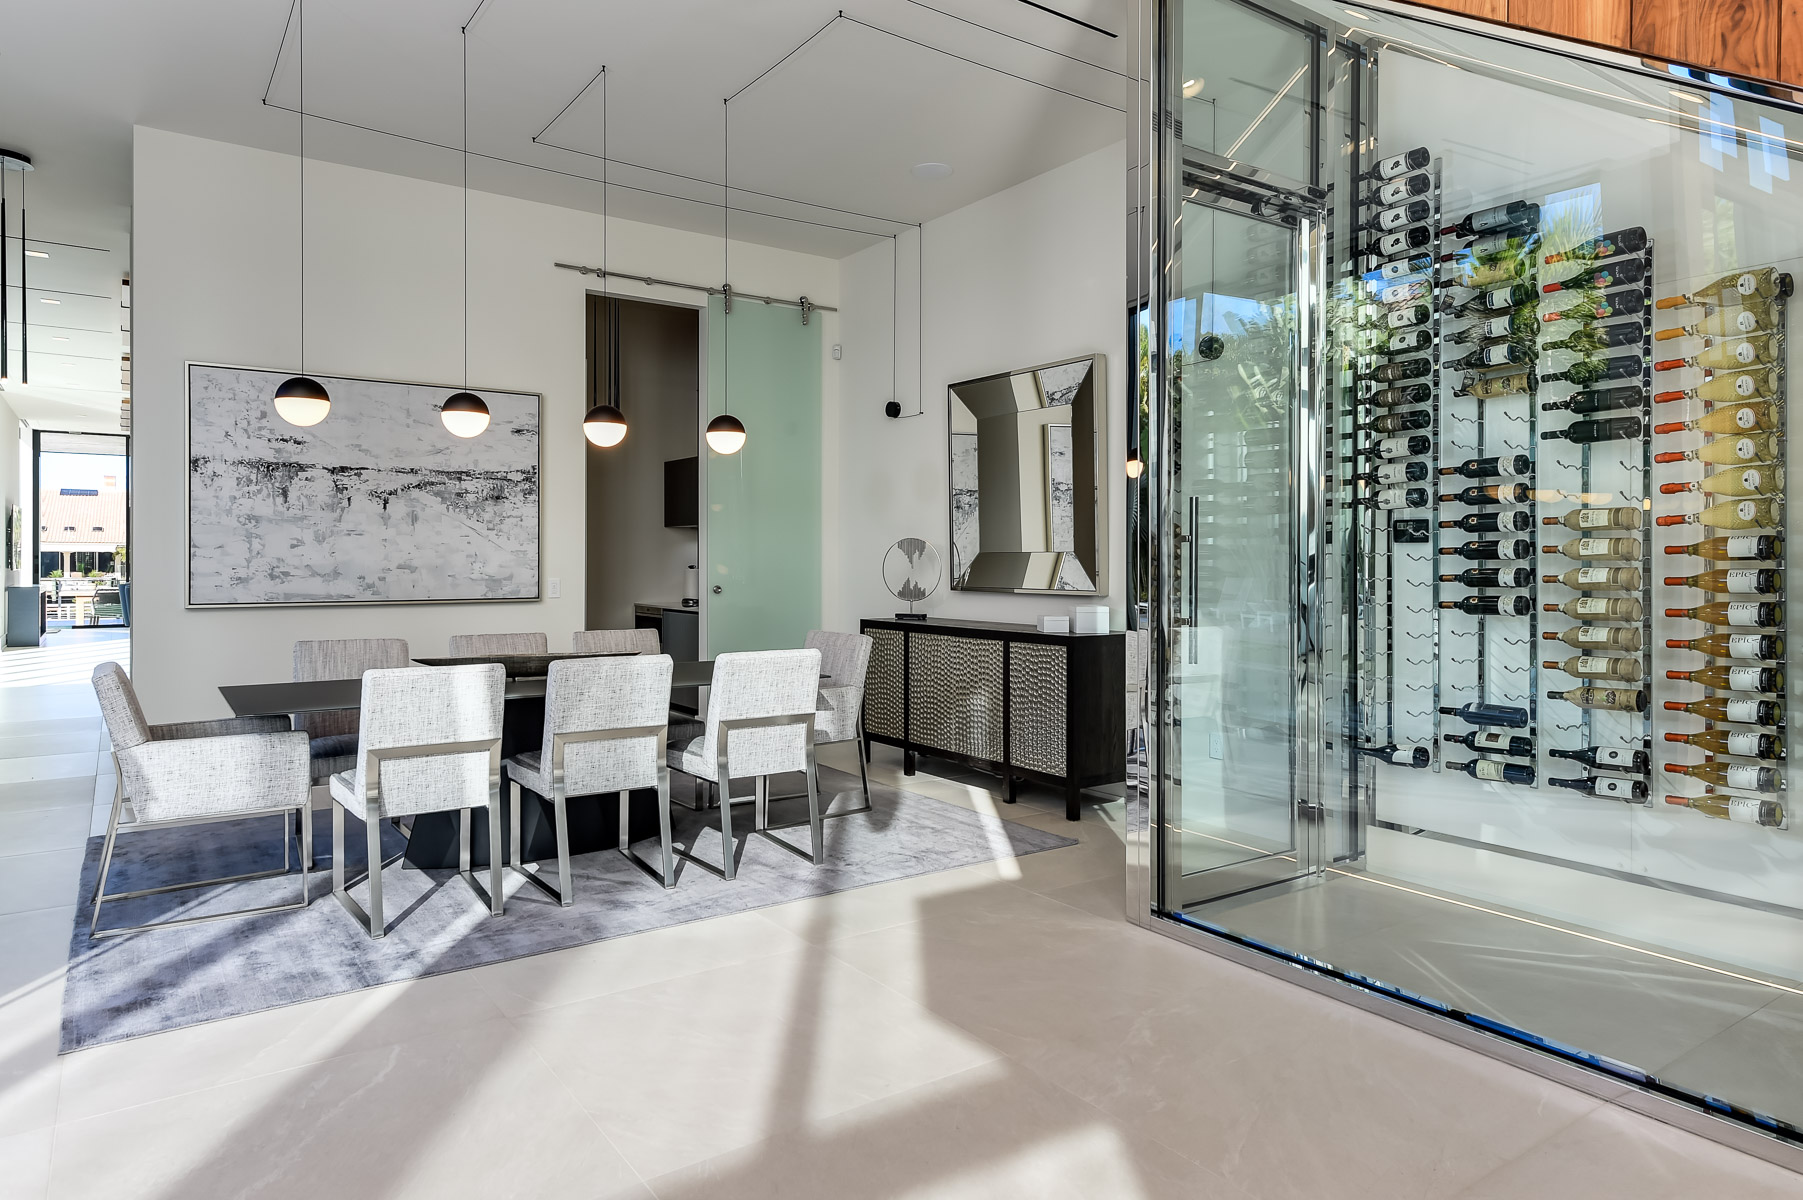 An interior design photographer captures a modern glass-walled wine cellar in a dining room.